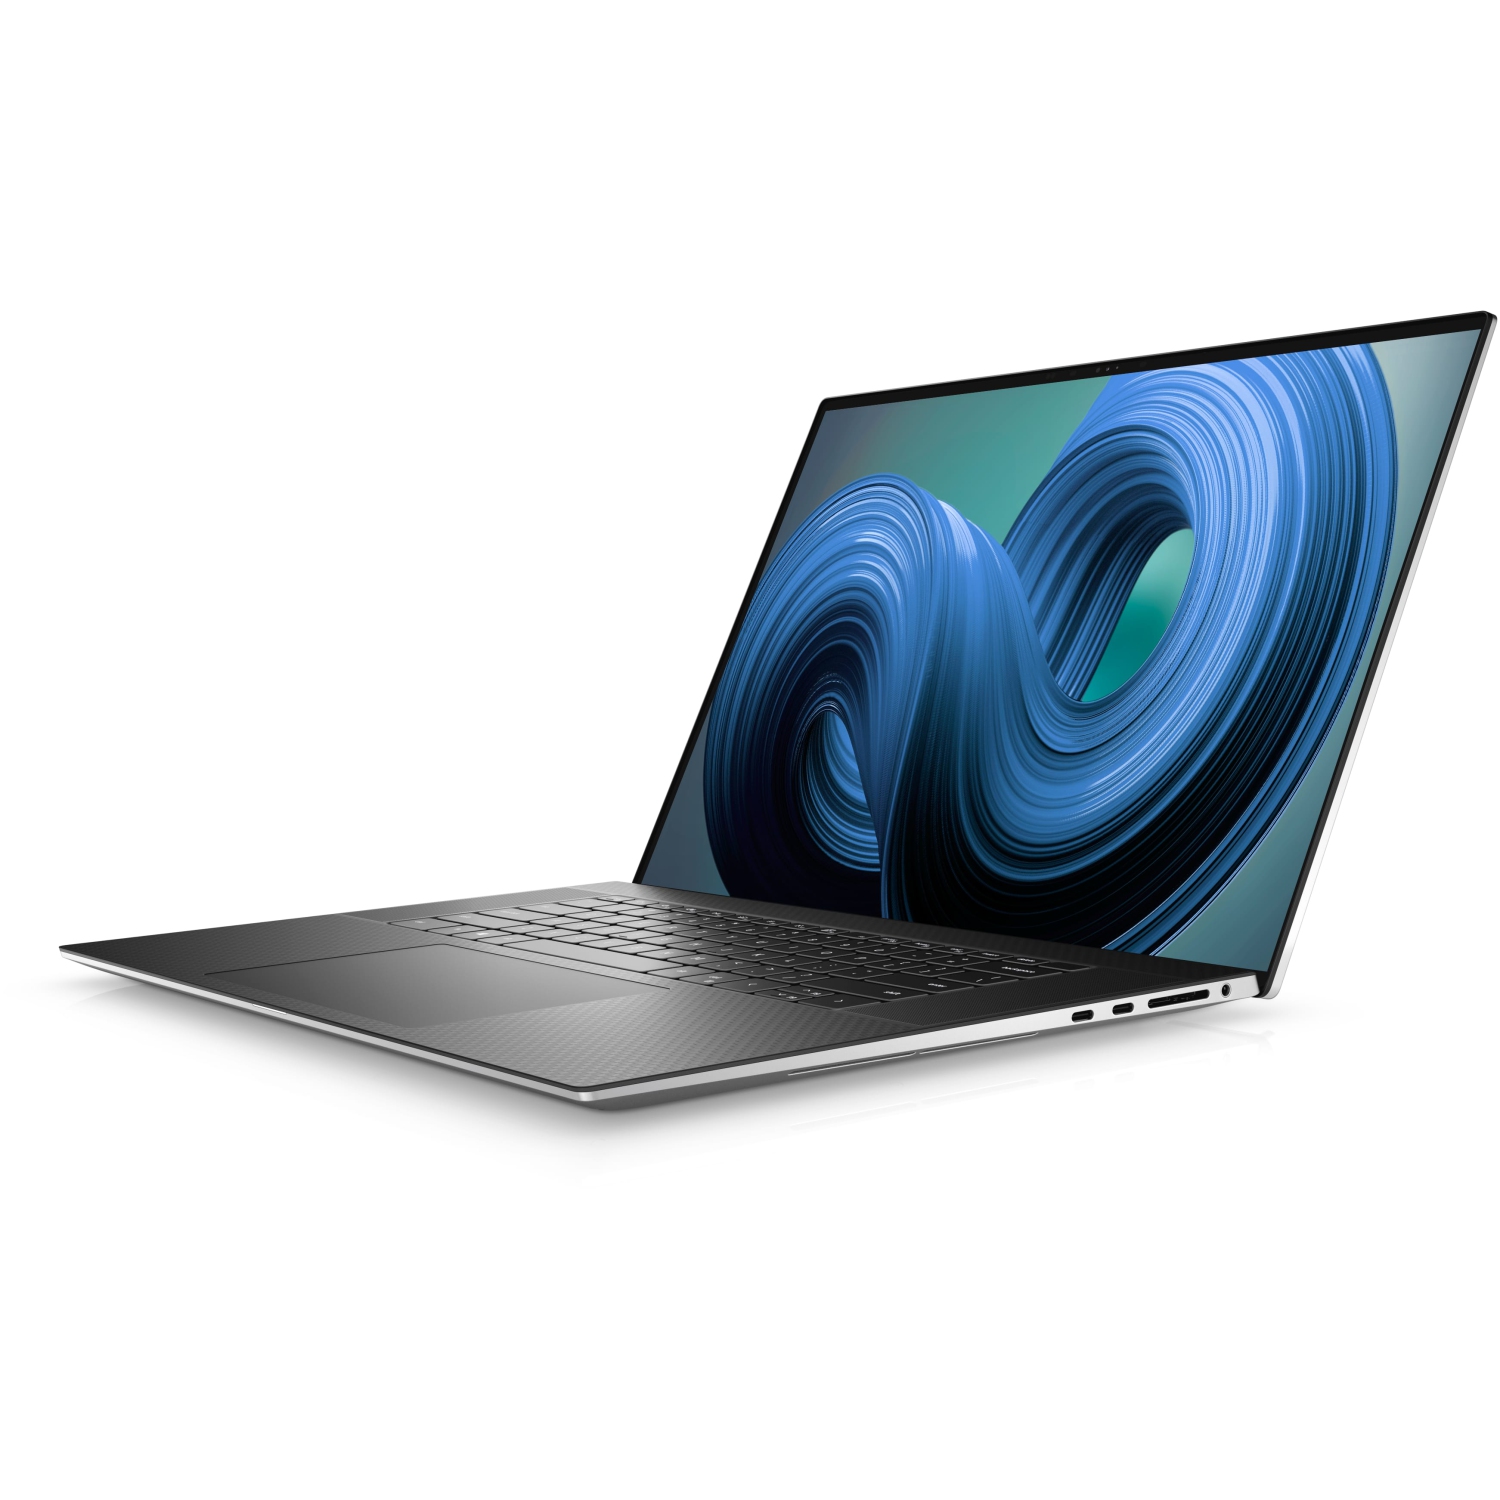 Refurbished (Excellent) – Dell XPS 9720 Laptop (2022) | 17" 4K Touch | Core i7 - 2TB SSD - 32GB RAM - RTX 3050 | 14 Cores @ 4.7 GHz - 12th Gen CPU